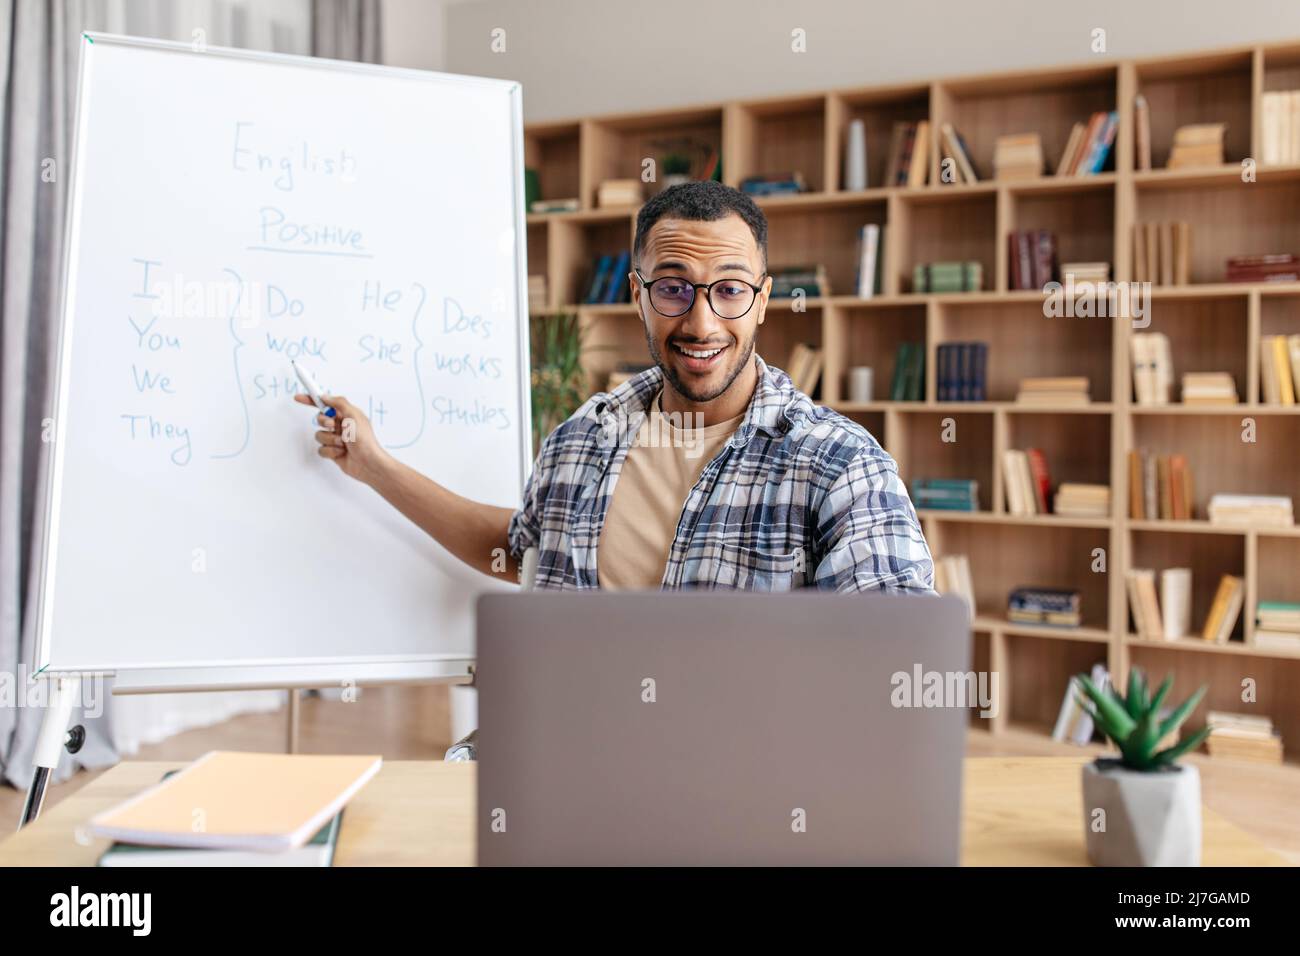 E-learning concept. Male English teacher sitting at table, pointing at whiteboard, having online lesson from home Stock Photo